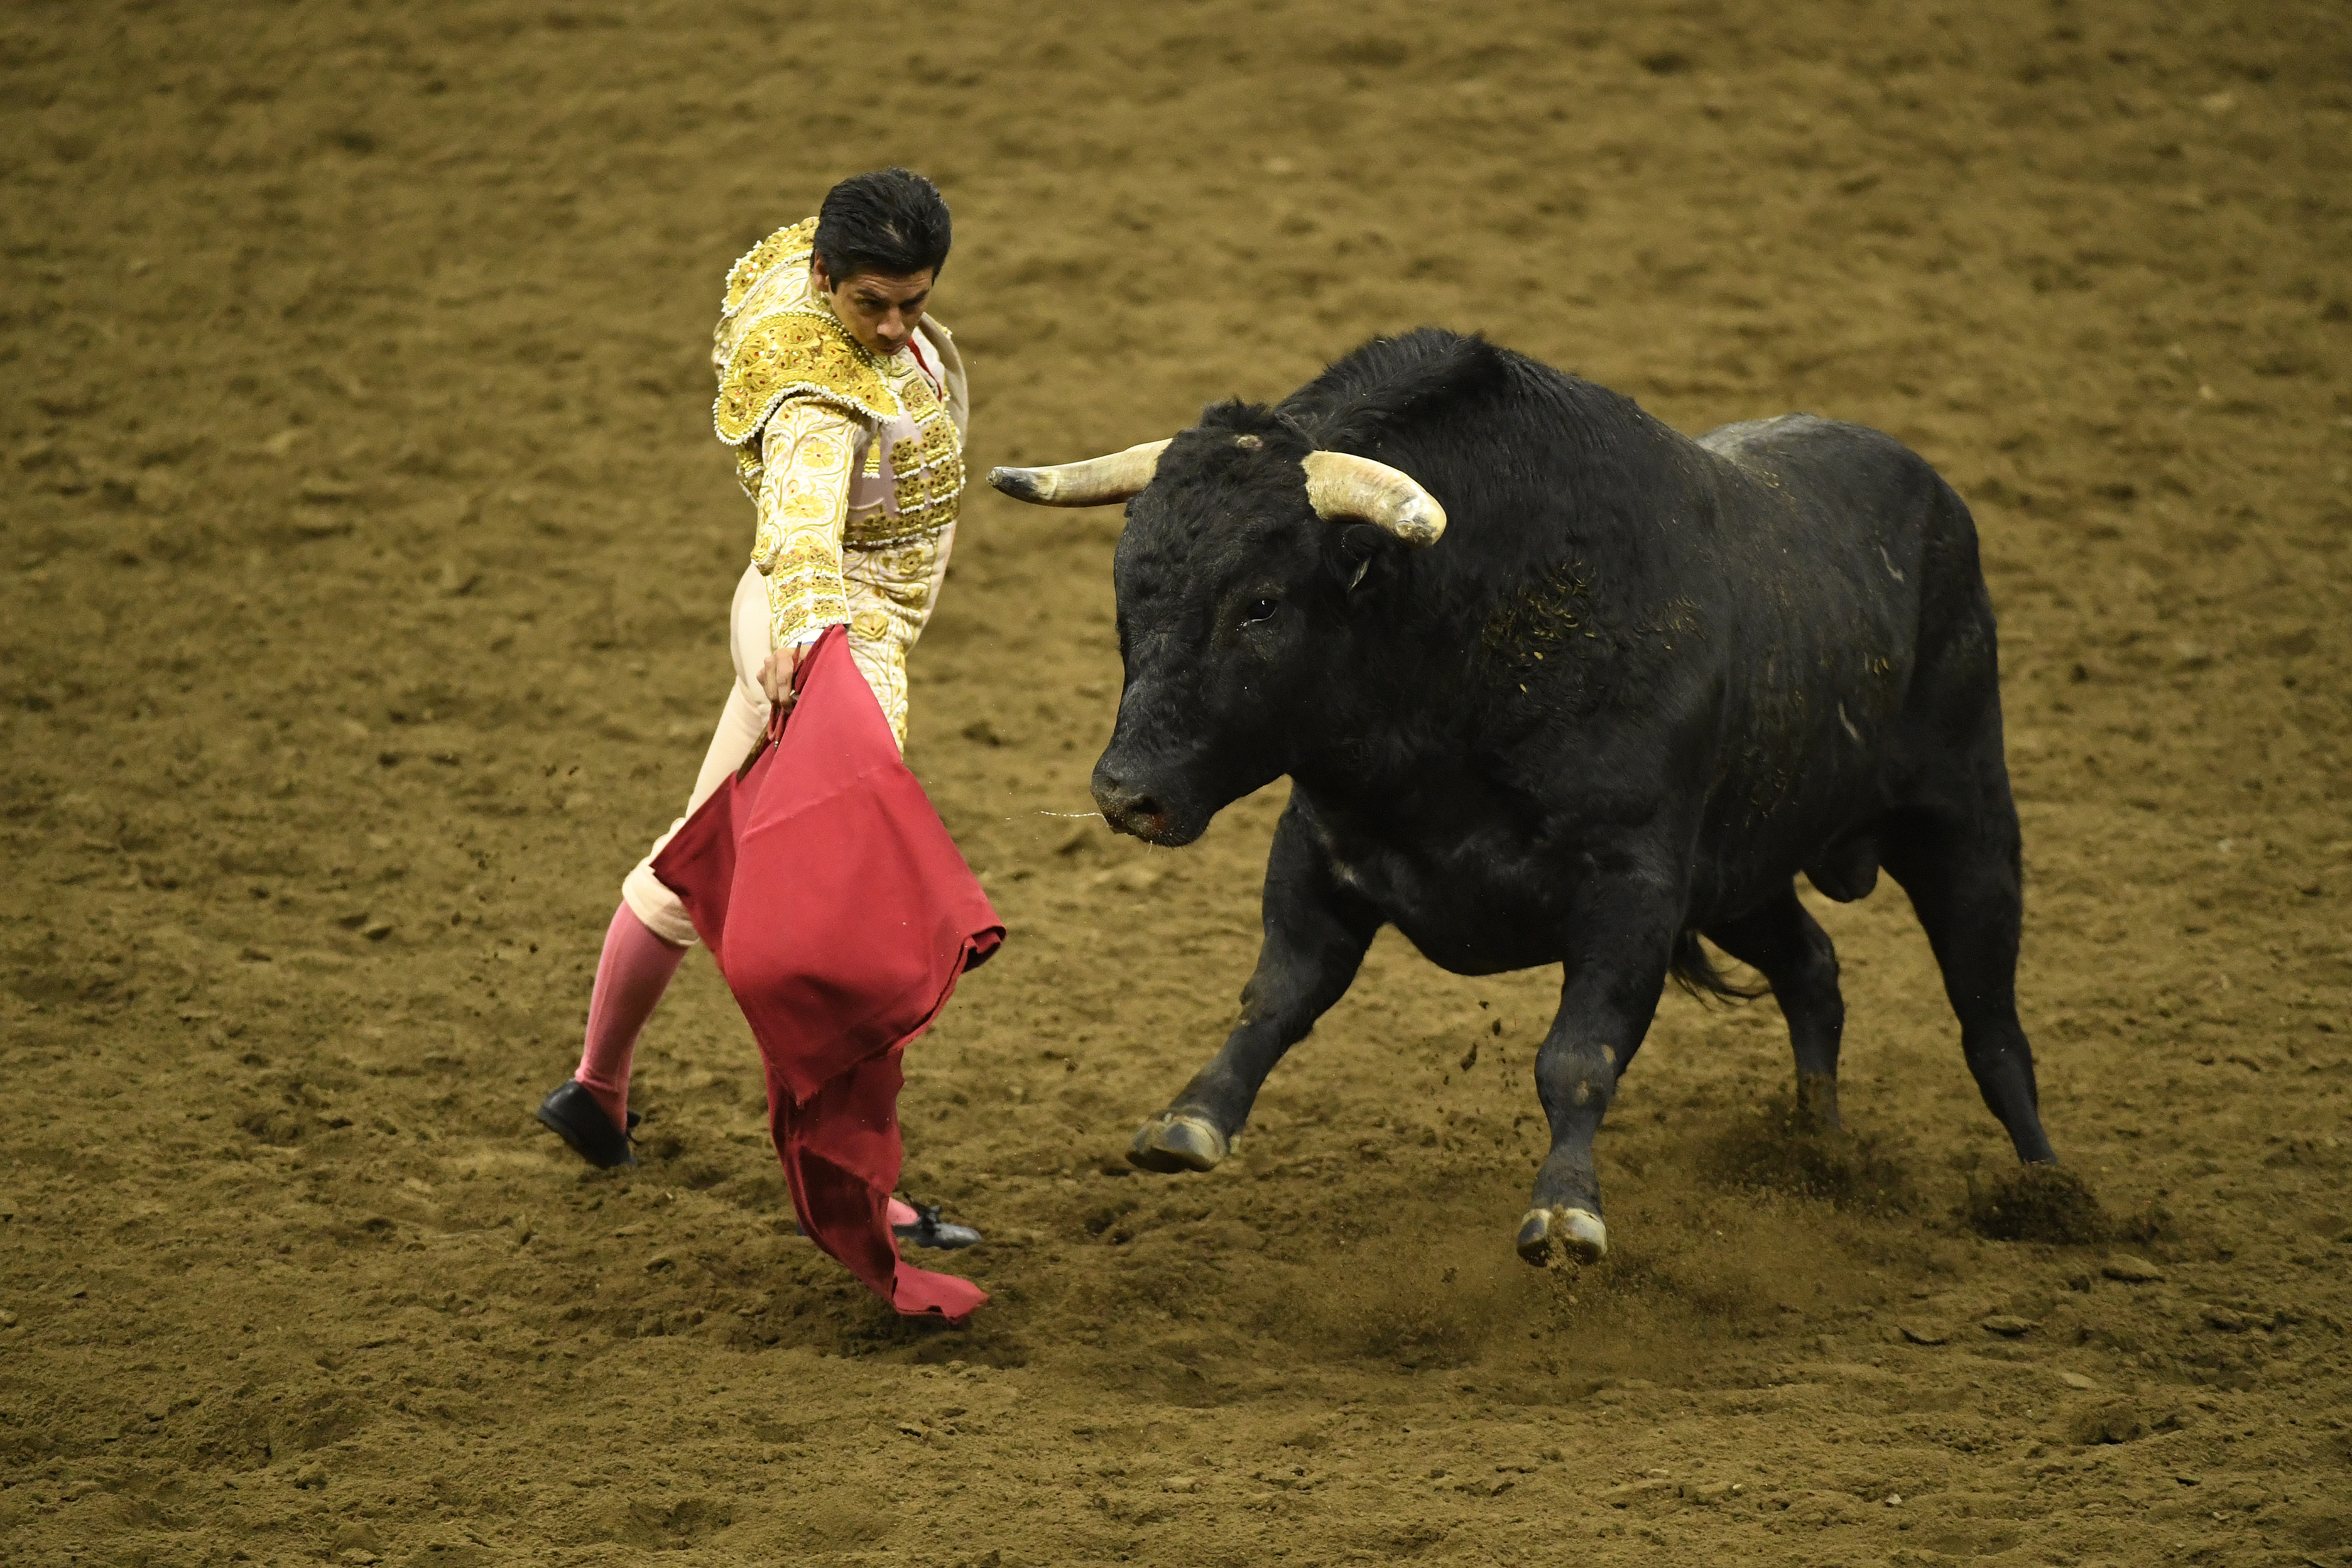 Controversial “bloodless bullfighting” comes to Denver Saturday ...